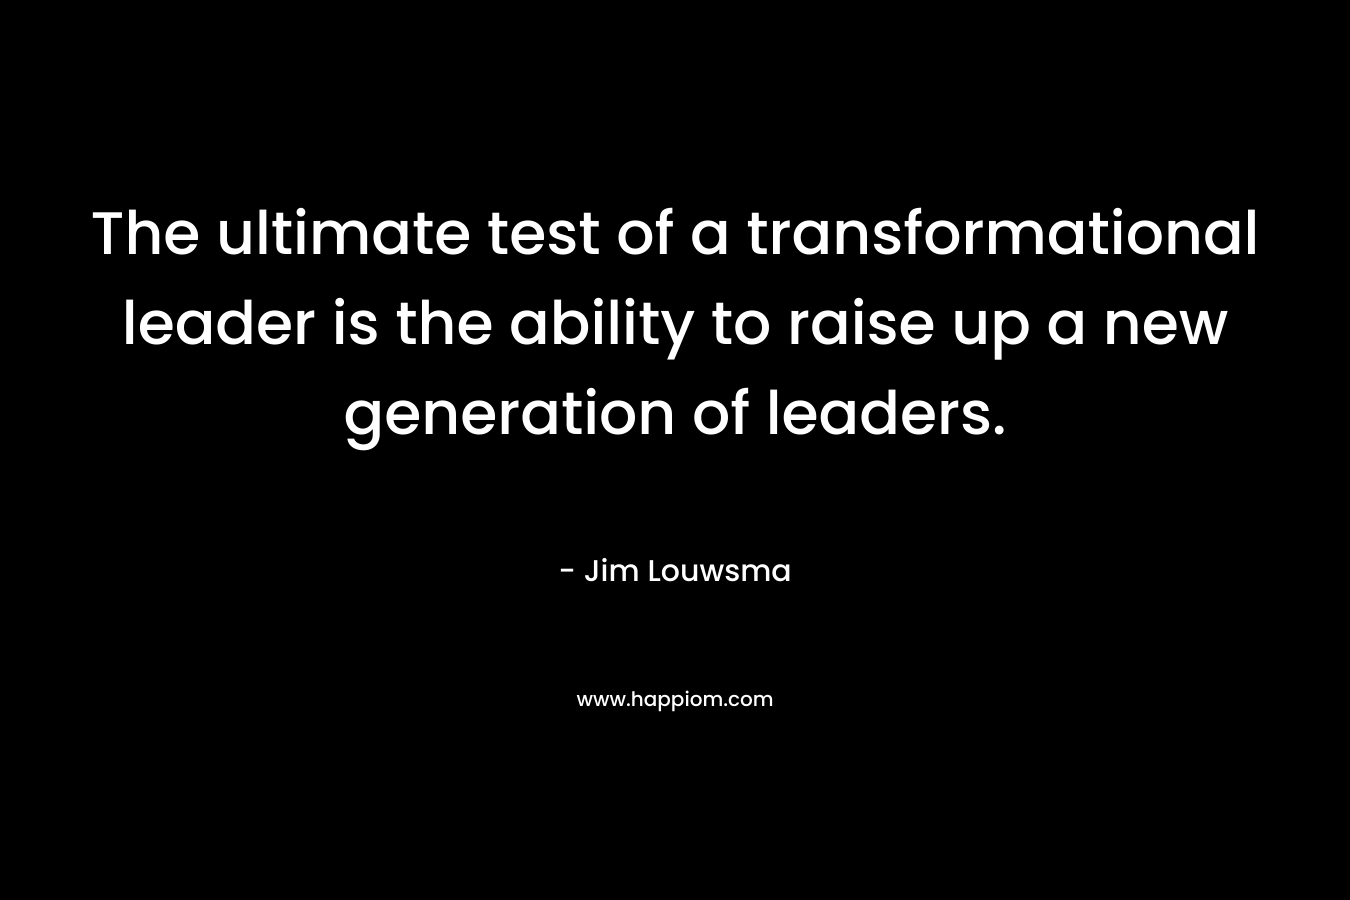 The ultimate test of a transformational leader is the ability to raise up a new generation of leaders.